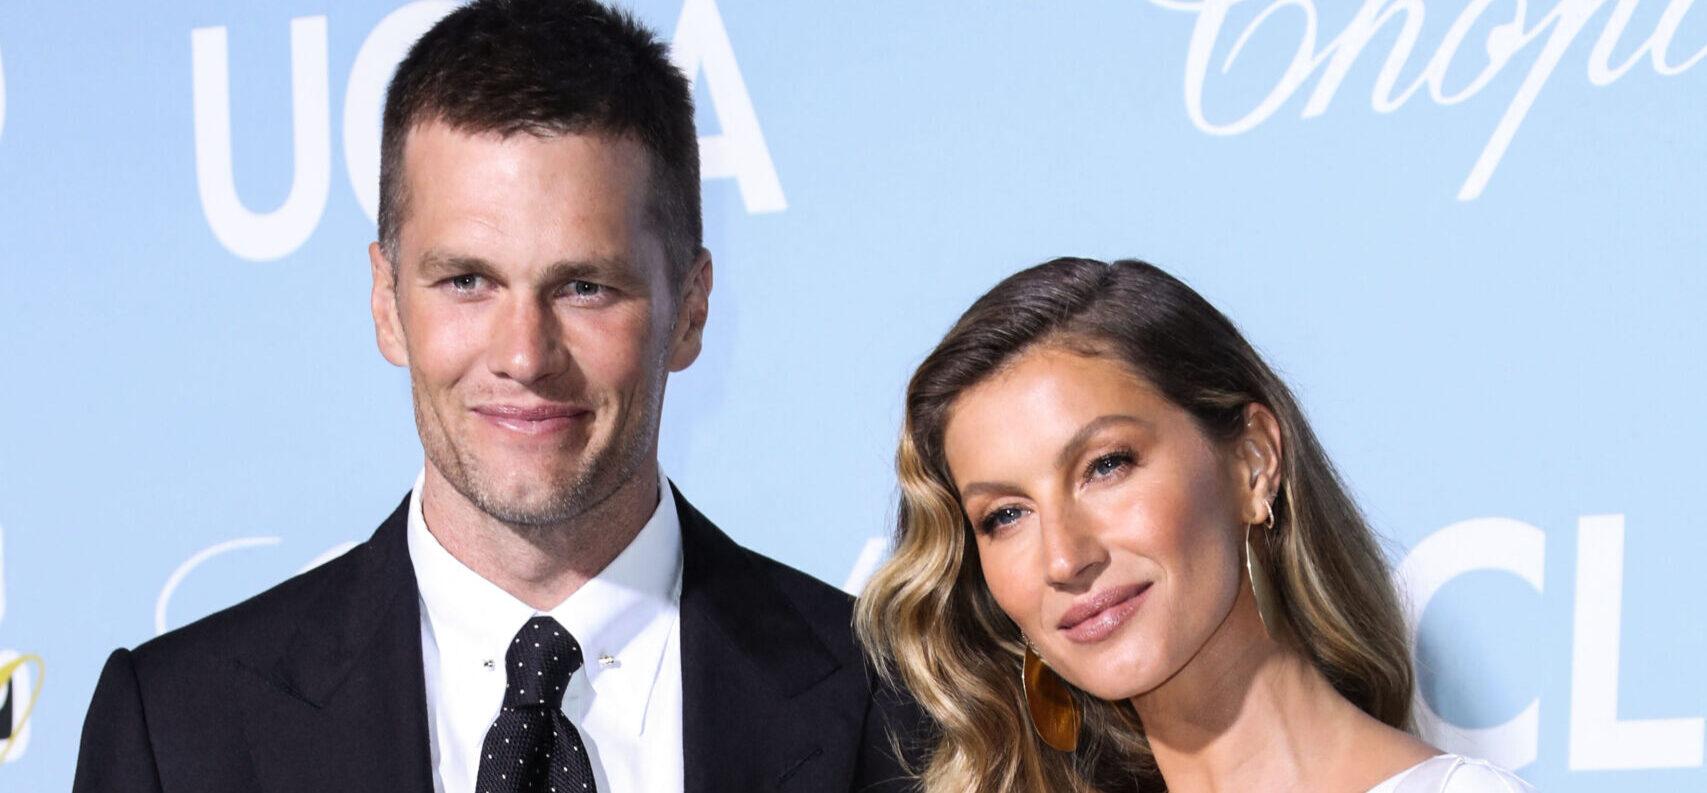 Tom Brady And Gisele Bundchen To File For Divorce After 13 Years Of Marriage